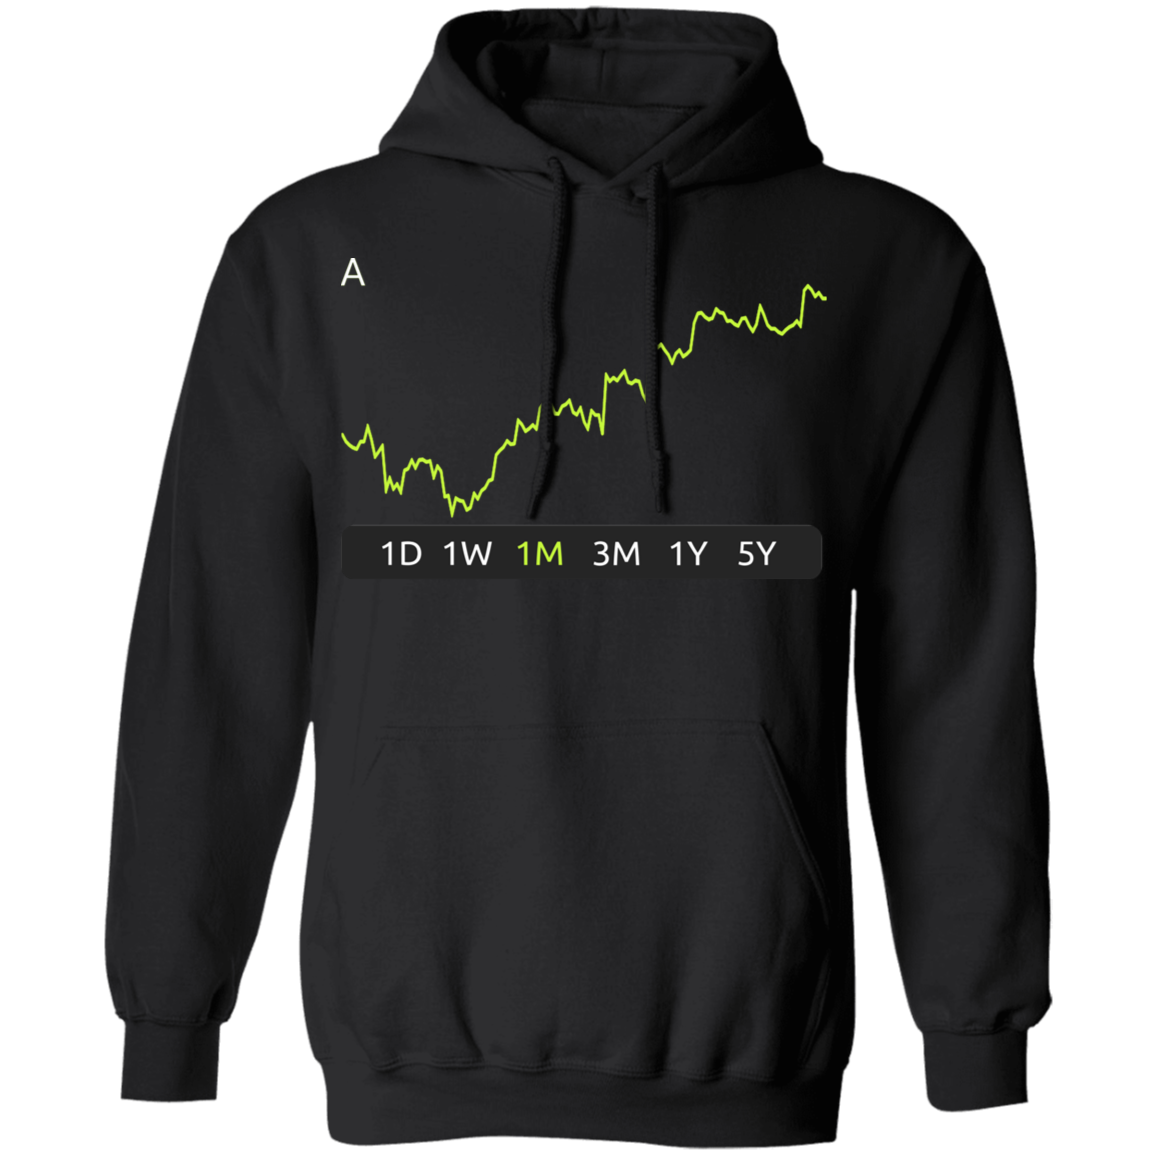 A Stock 1m Pullover Hoodie